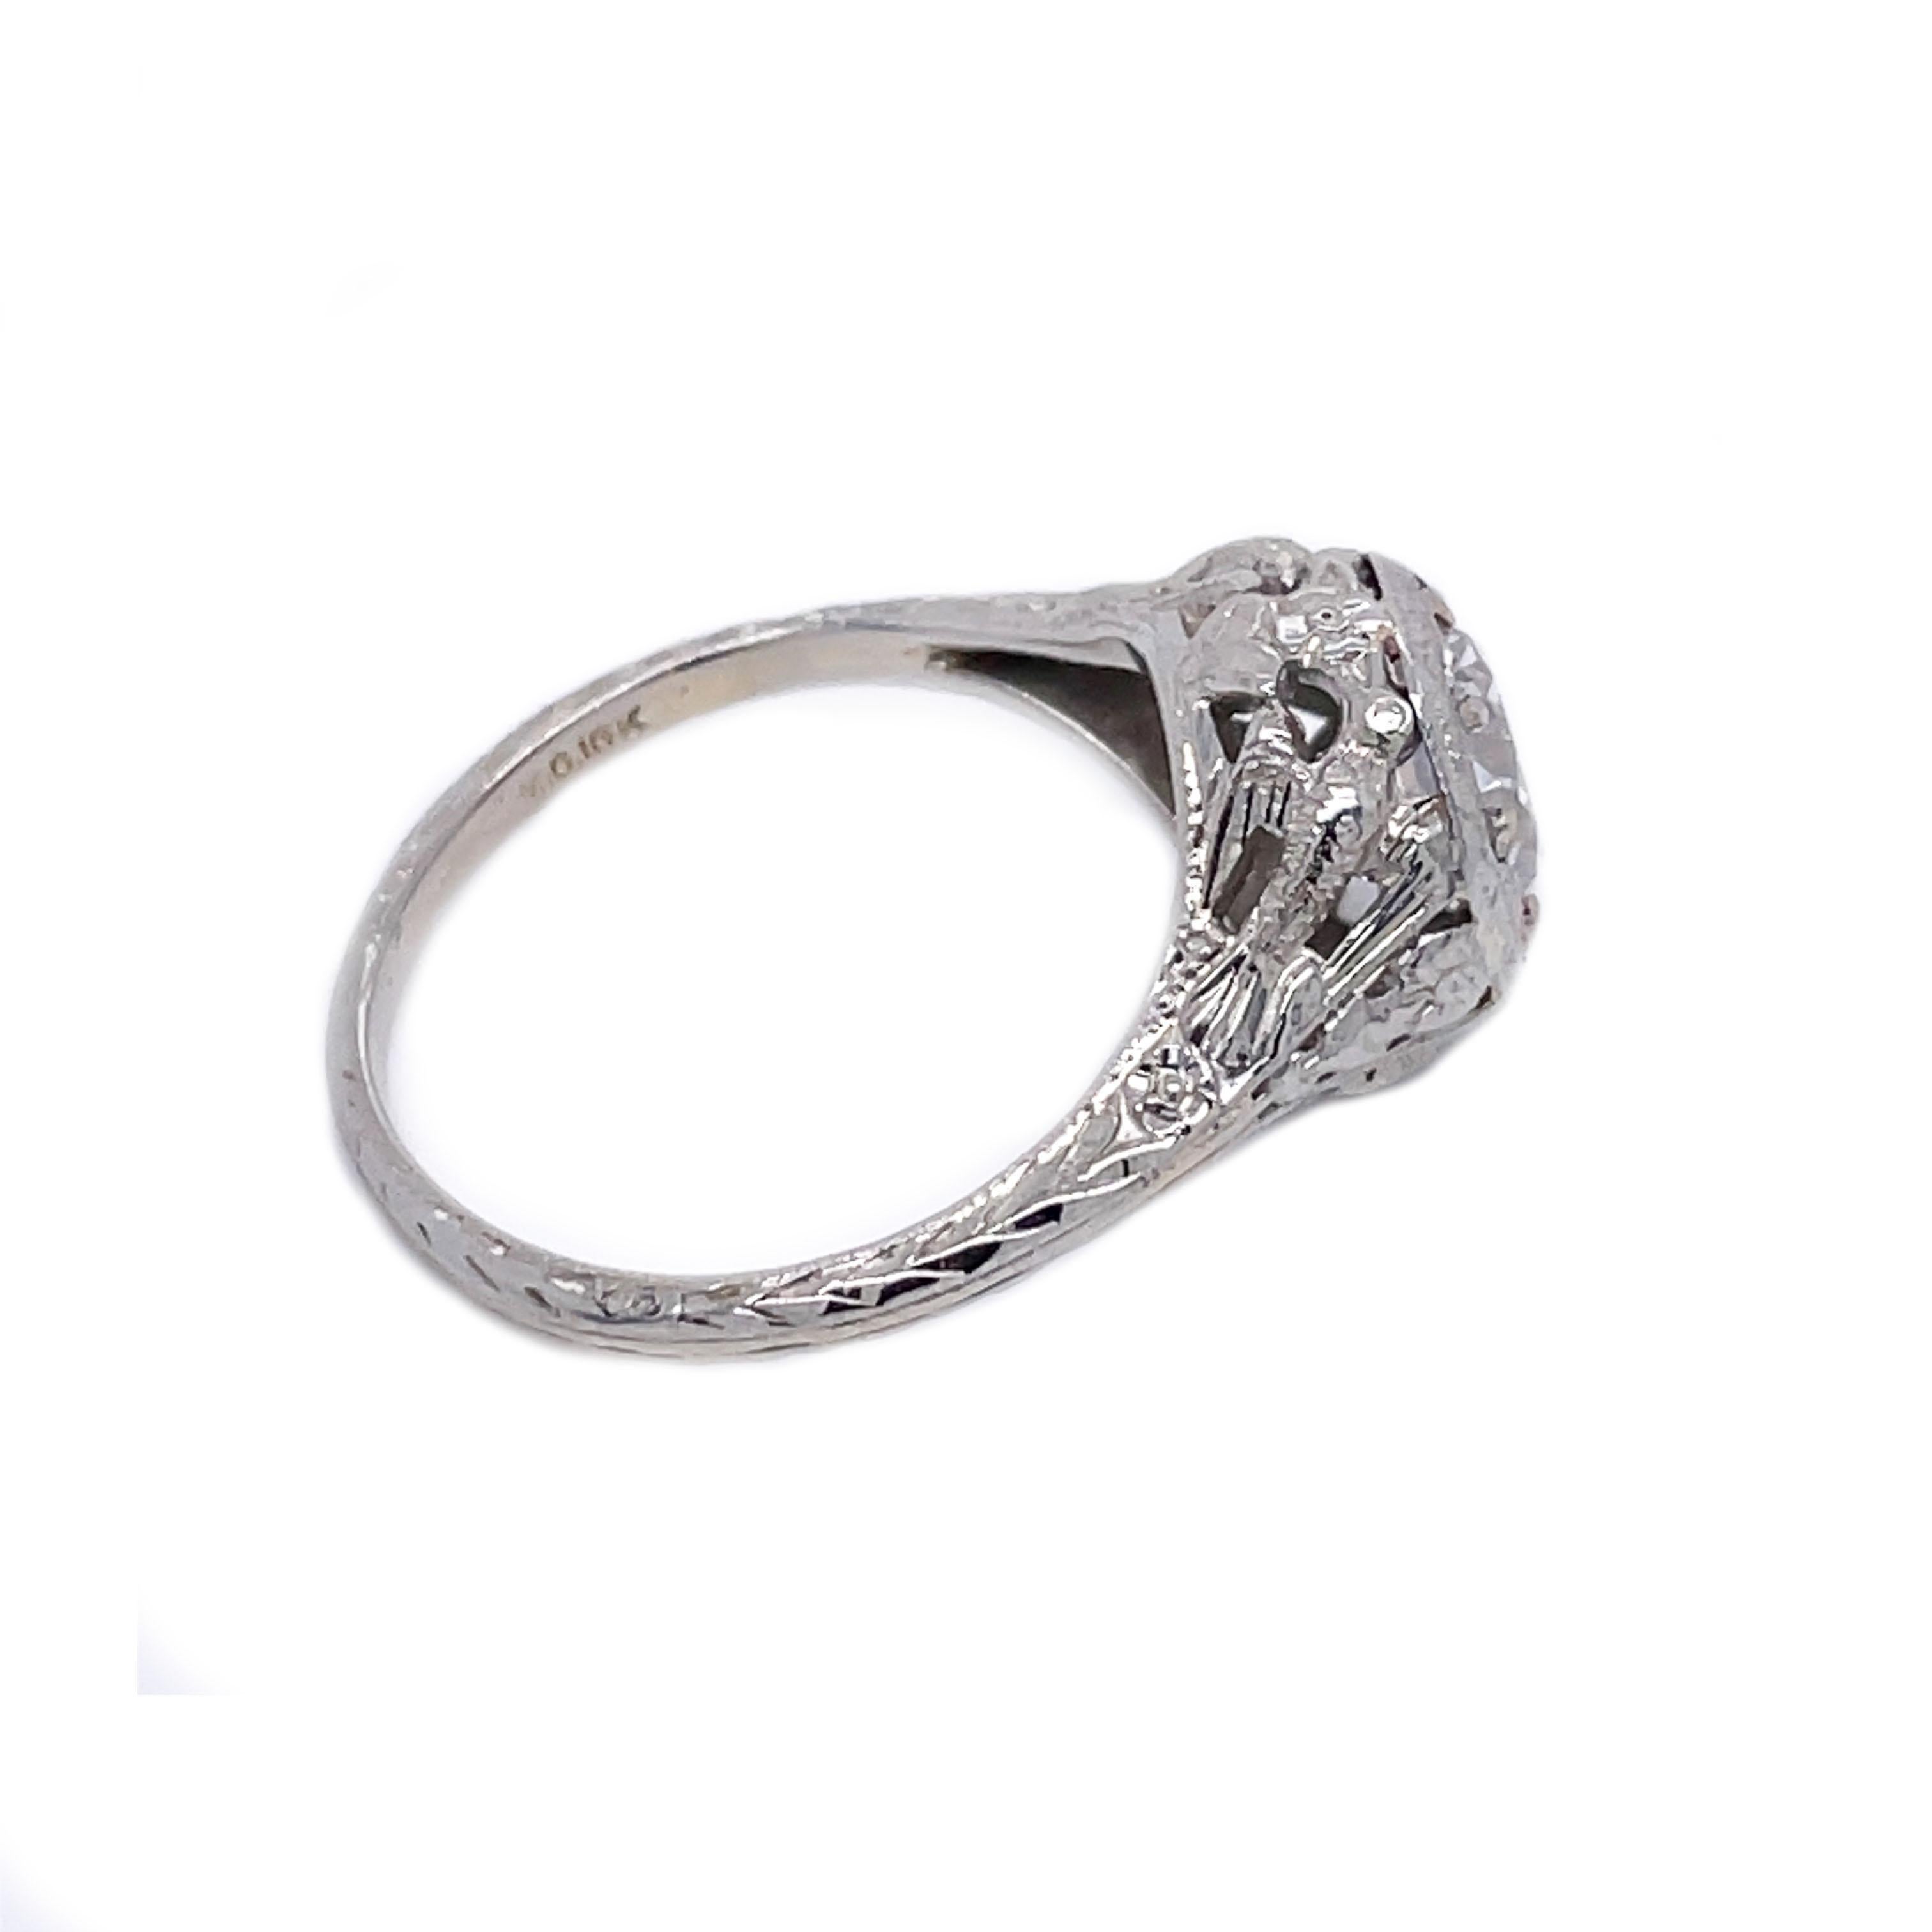 1920s 18K White Gold Filigree Diamond Love Bird Ring with GIA Report For Sale 4